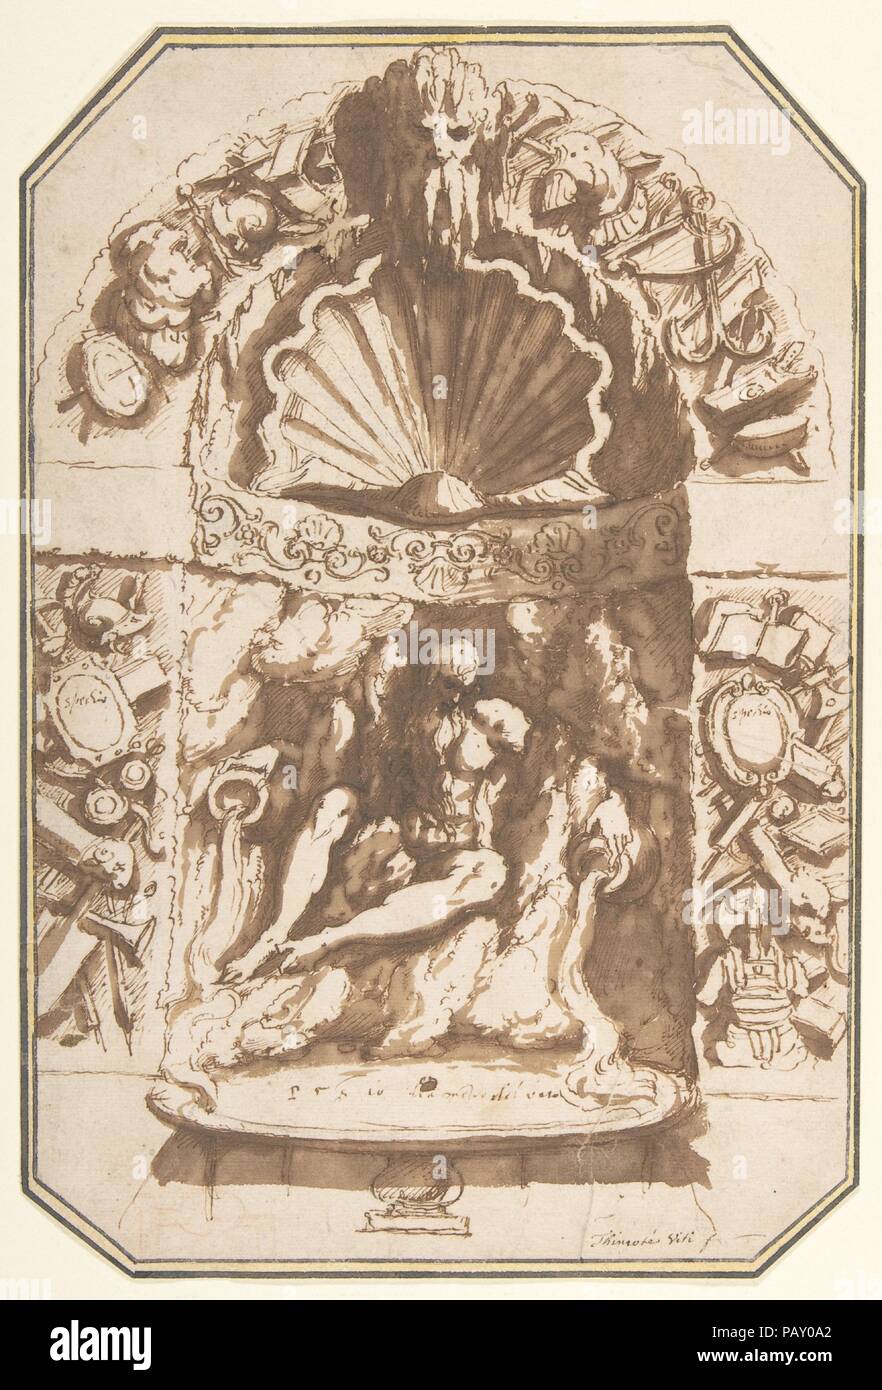 A Fountain in a Grotto. Artist: Giovanni Guerra (Italian, Modena 1544-1618 Rome). Dimensions: maximum, corners cut to octagonal shape: 10 3/4 × 7 1/4 in. (27.3 × 18.4 cm). Date: ca. 1598.  During the 16th century, Italian nobles developed a taste for artificial grottoes in their gardens and sometimes even in their houses. Artists, such as Giambologna and Bernardo Buontalenti became very skilled in inventing landscapes of rocks and shells often inhabited by amphibians, invertebrates and other animals. The aquatic nature of most of these grottoes also lent itself well to the inclusion of fountai Stock Photo